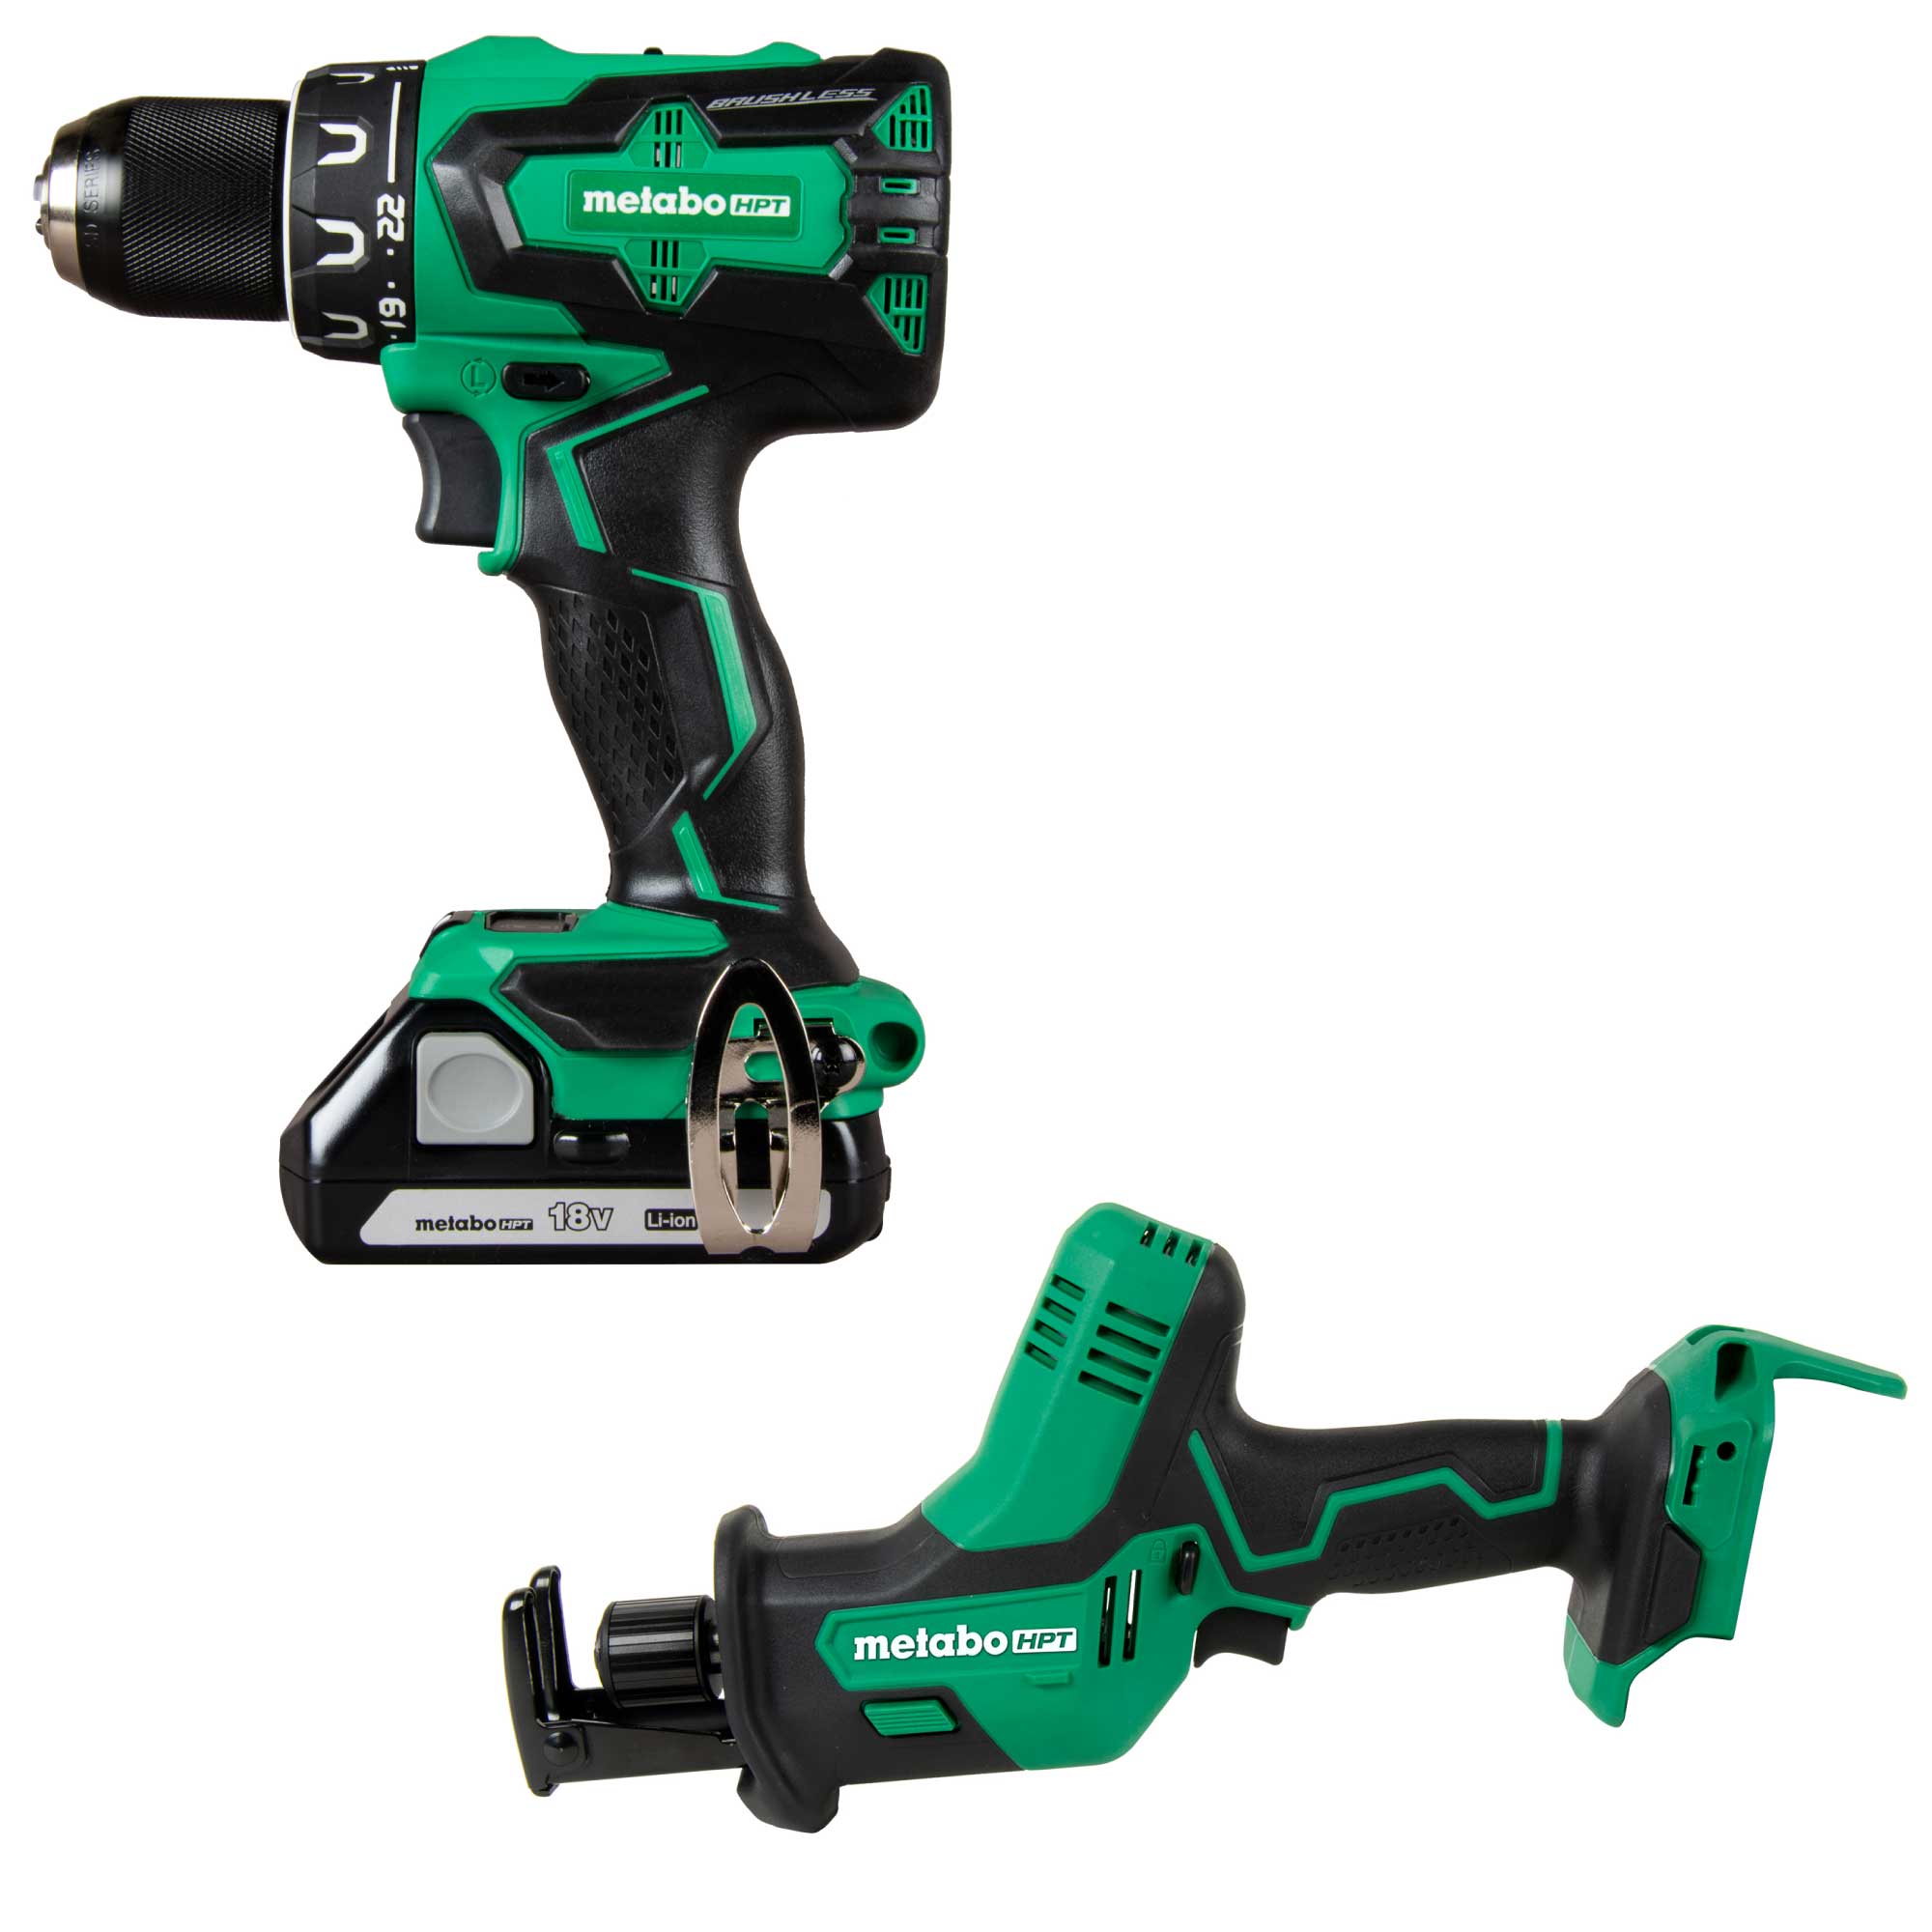 Metabo HPT MultiVolt 18-Volt 1/2-in Brushless Cordless Drill (2-batteries included and charger included) with MultiVolt 18-volt Variable Speed